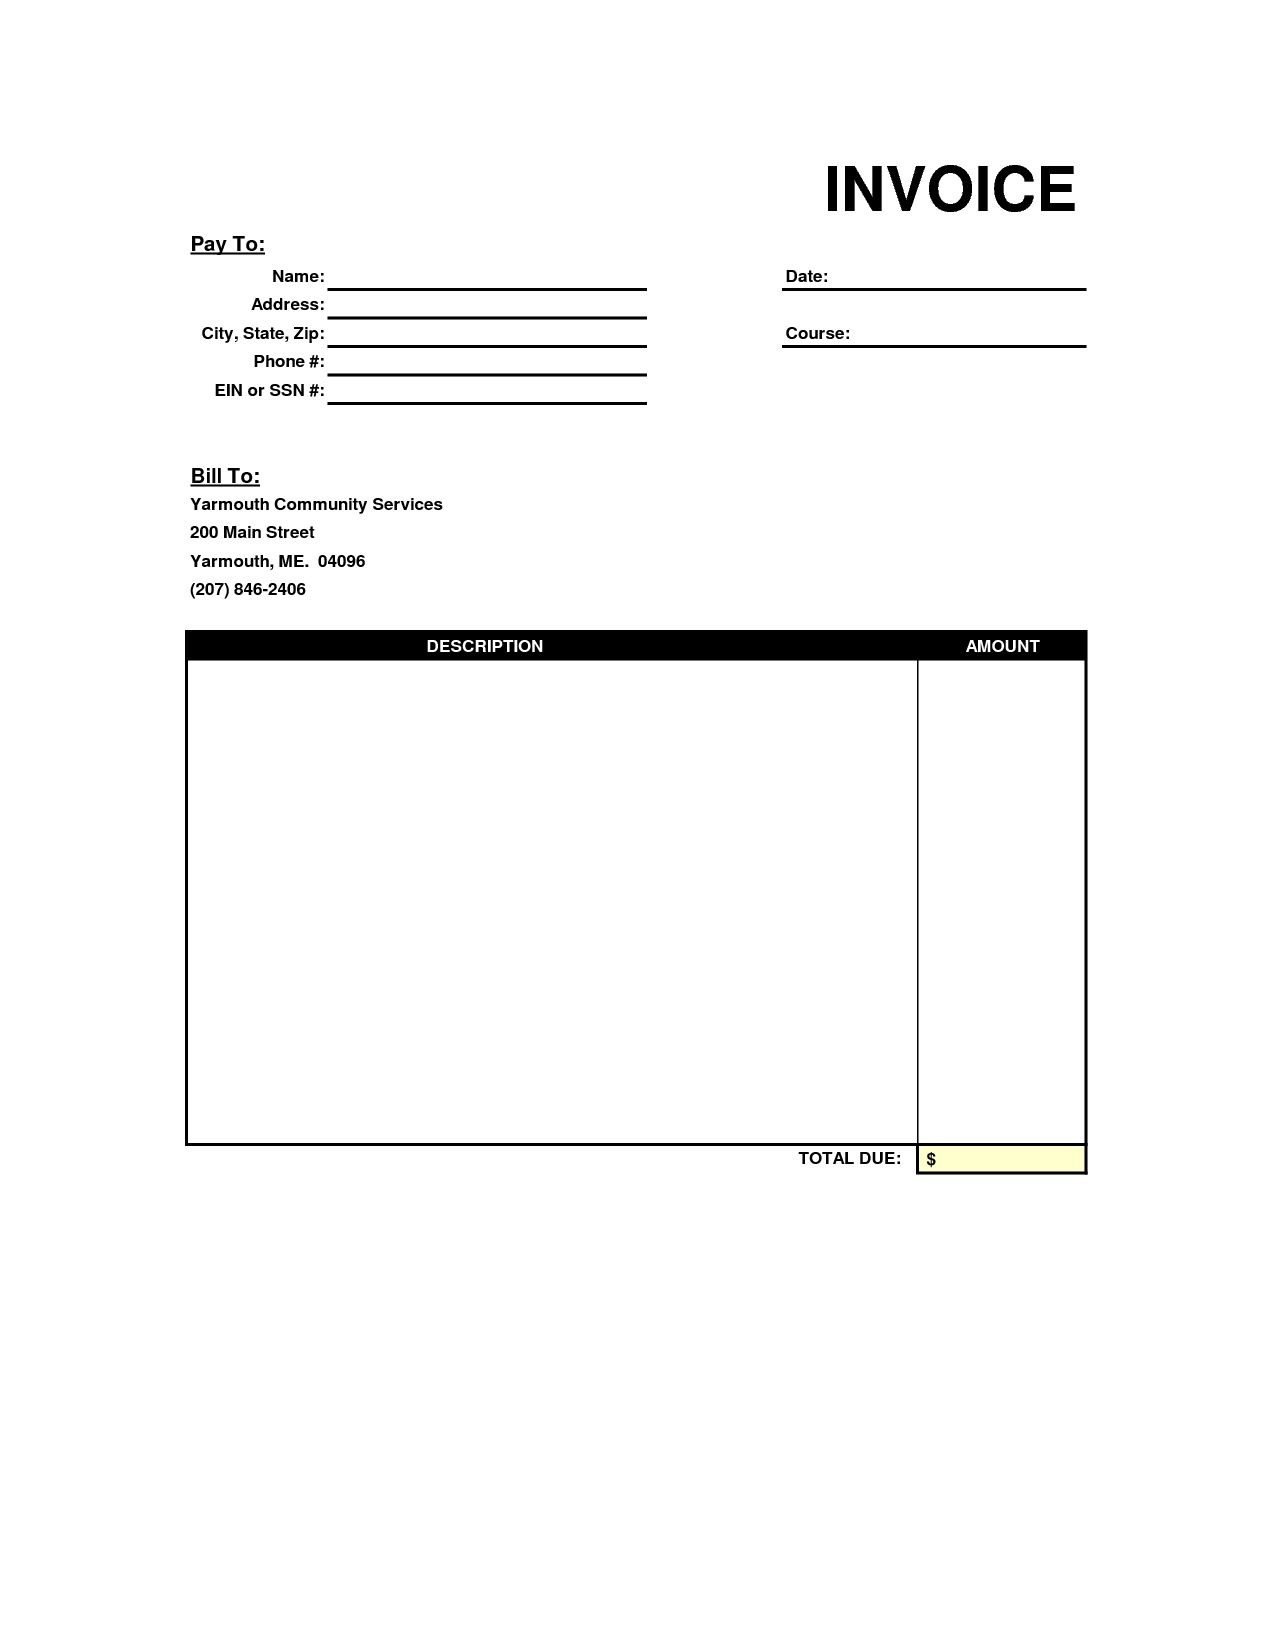 Blank Copy Of An Invoice Google Recruiter Resume Copy Of Blank - Free Printable Invoice Templates